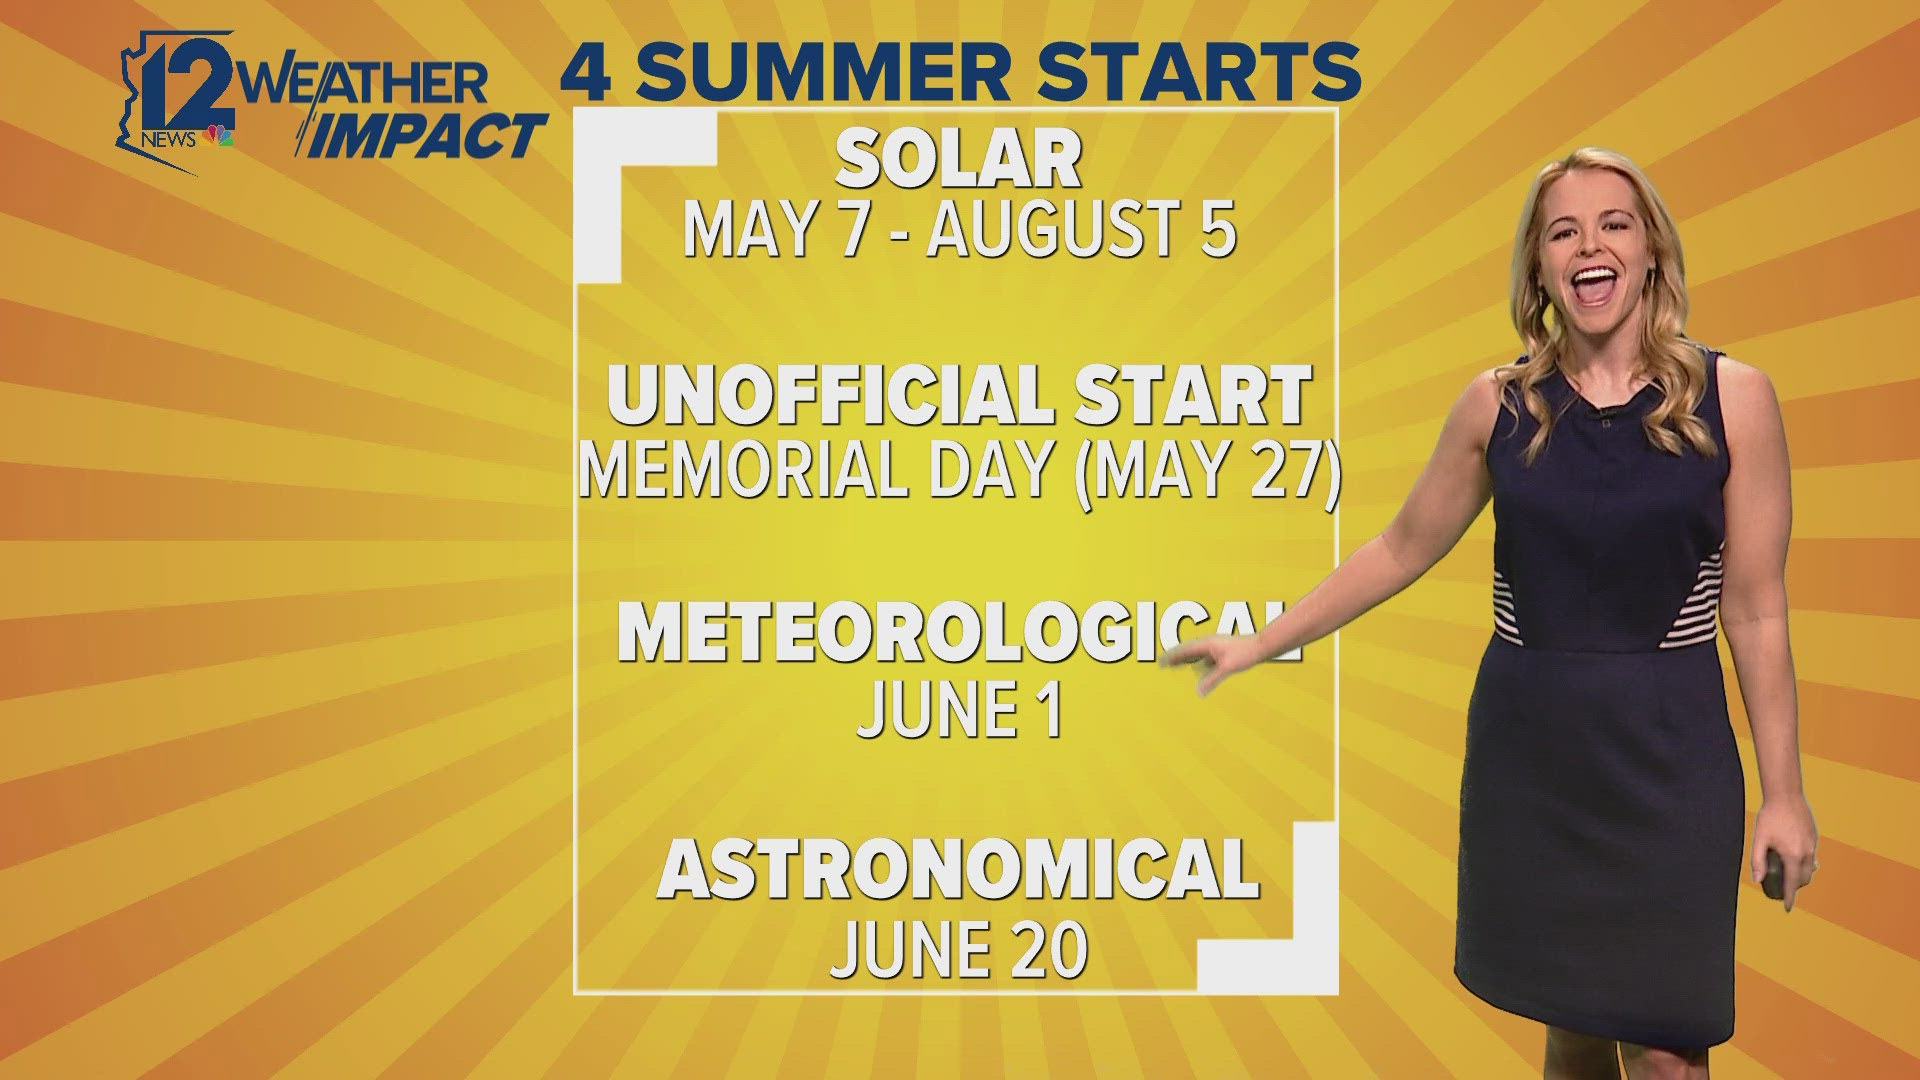 The summer solstice is on Thursday, June 20 this year, marking the official start of summer. This is the earliest one within nearly 300 years.